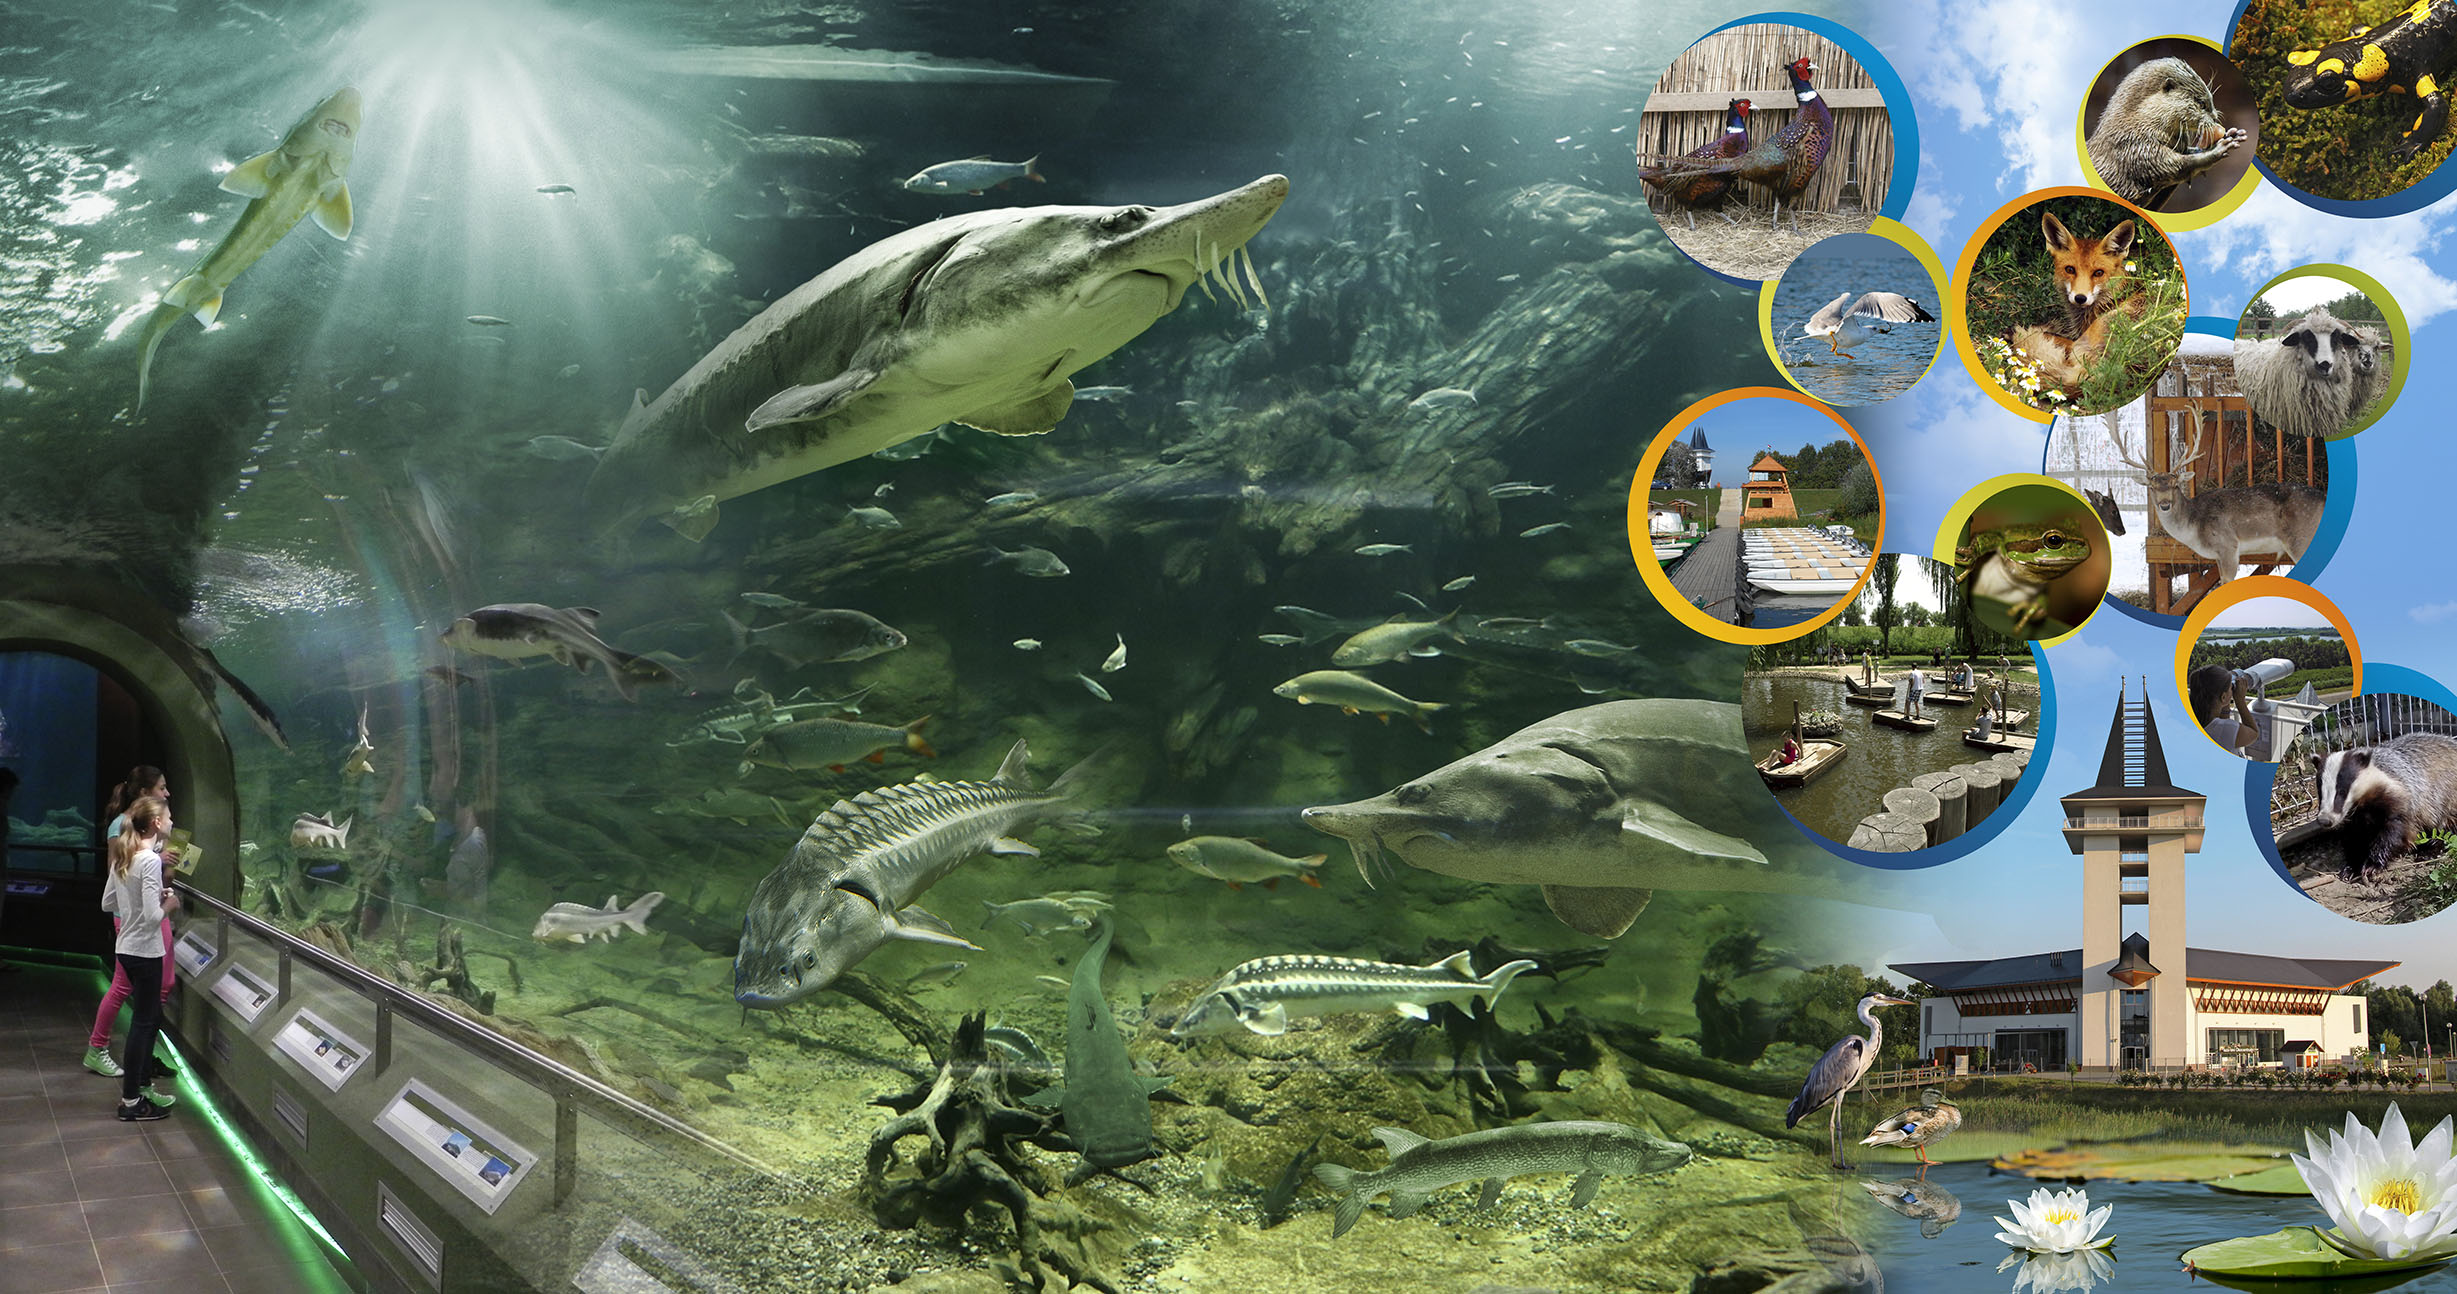 Top 10 Most Beautiful Freshwater Aquariums of 2012 — Hungarian Edition!